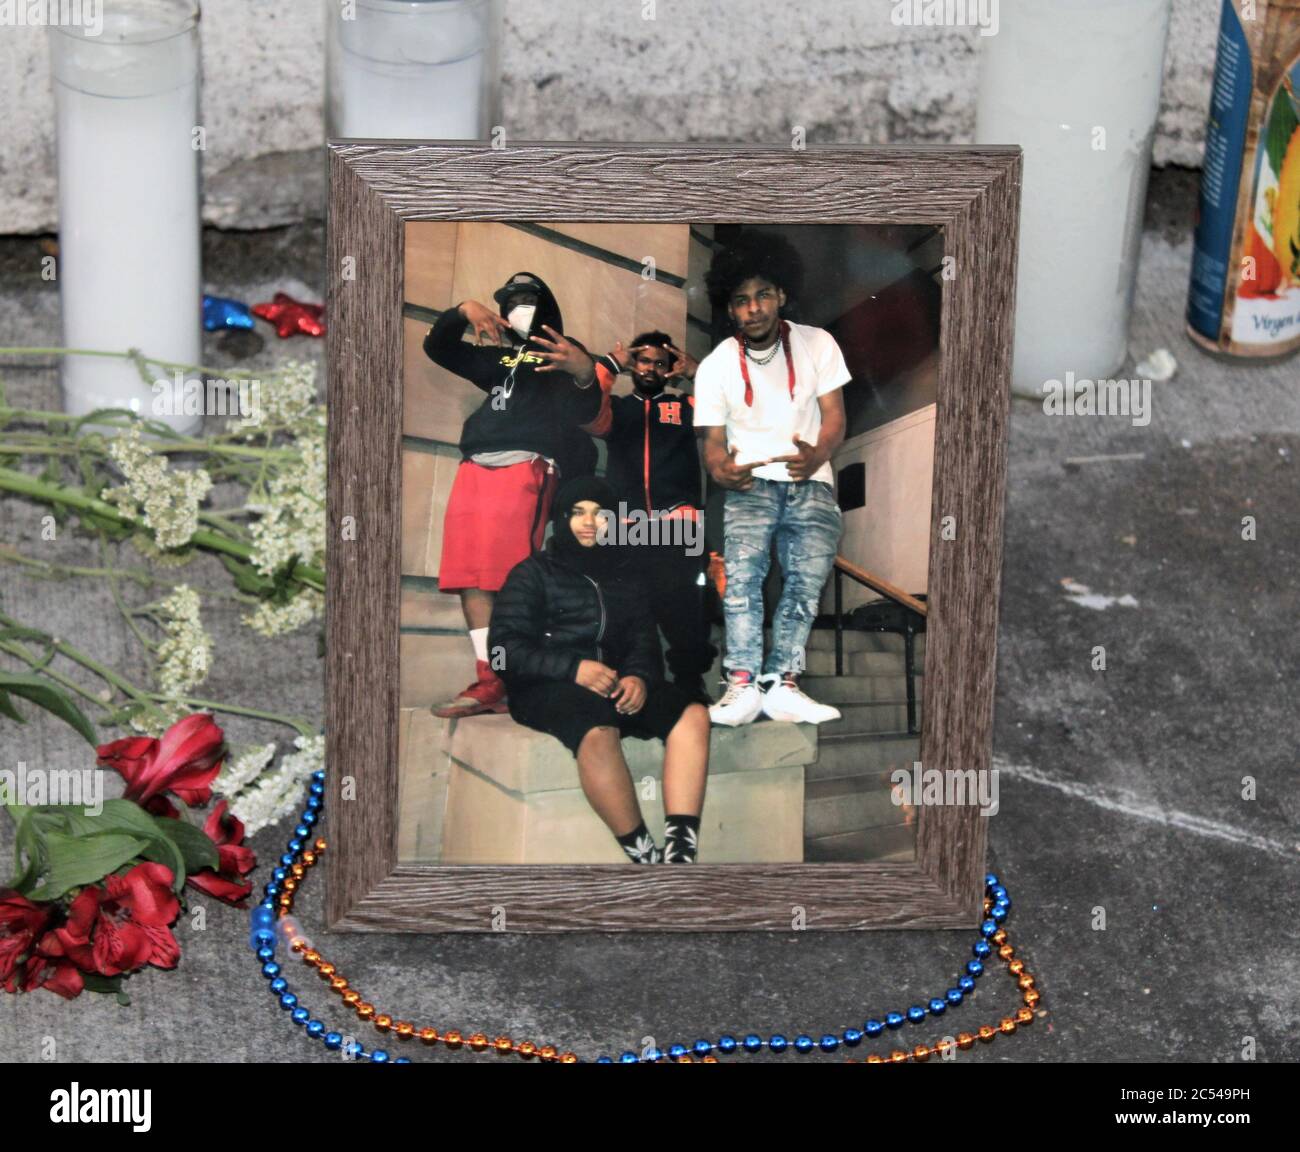 June 27, 2020, U.S: Shooting victims at CHOP/CHAZ, SEATTLE: A 15 year old boy nicknamed Pocket was killed and his brother, 14 year old Rob, in intensive care after being critically wounded, also from a bullet. Photo at memorial site where the shootings occurred during the early morning hours of June 29 at the Capitol Hill Occupied Zone (CHOP), also called Capitol Hill Autonomous Zone (CHAZ), a six block zone in Seattle's Capitol Hill District, which has been occupied by protestors since May 25, when they gathered in response to the police killing of George Floyd. Both boys were homeless and li Stock Photo